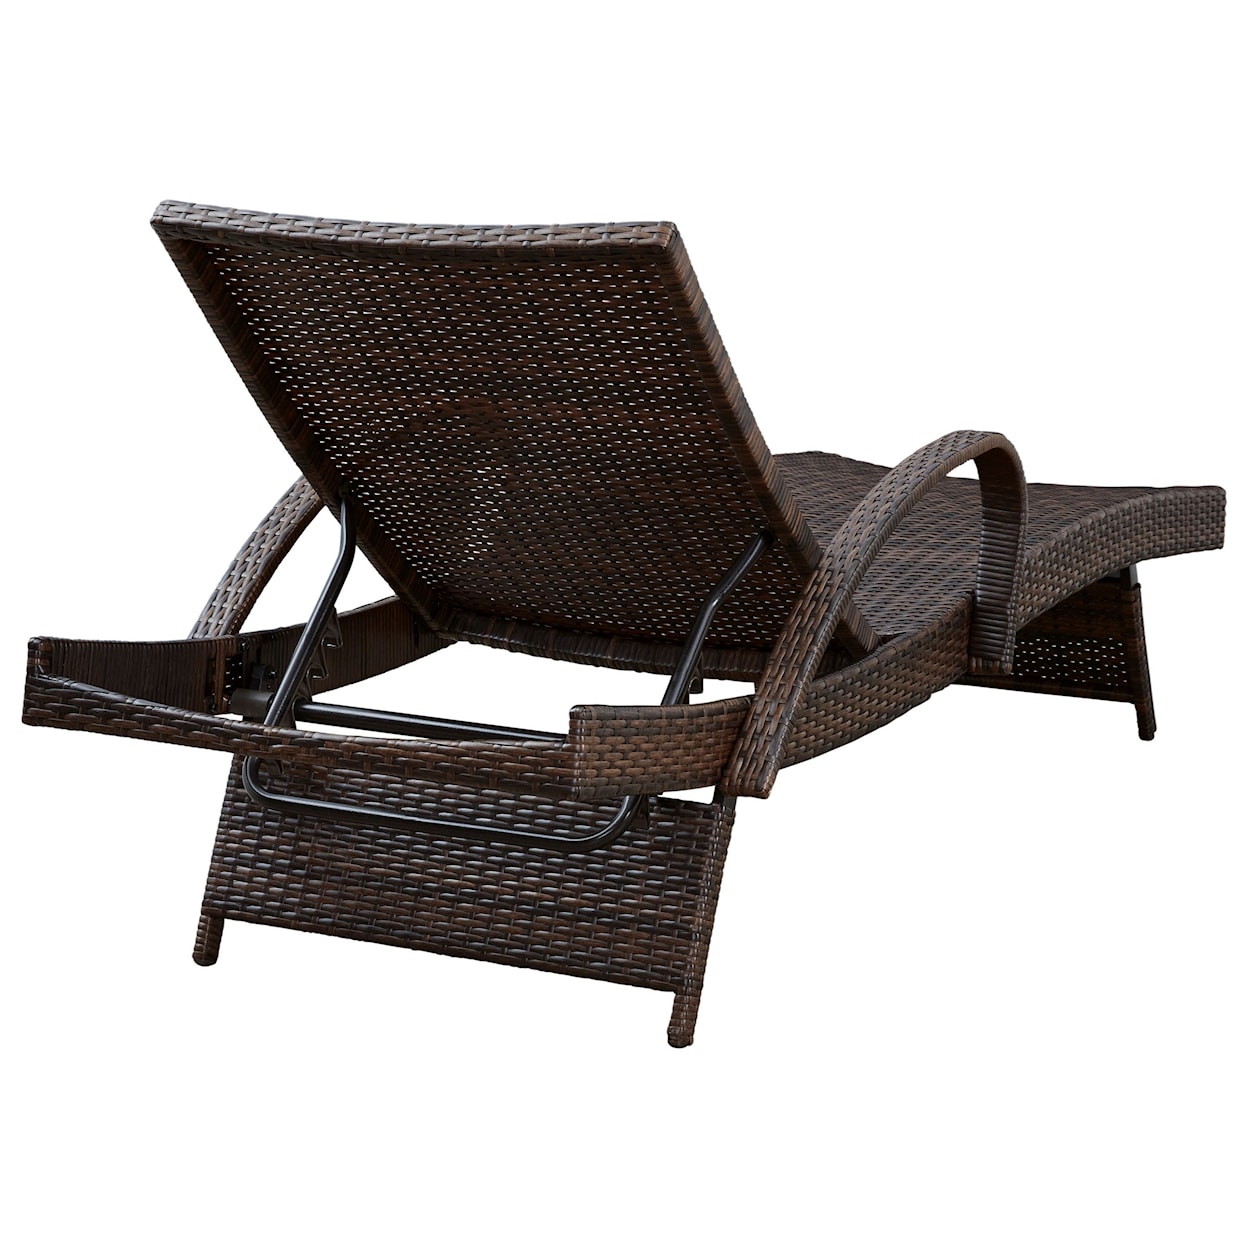 Benchcraft Kantana Set of 2 Chaise Lounges